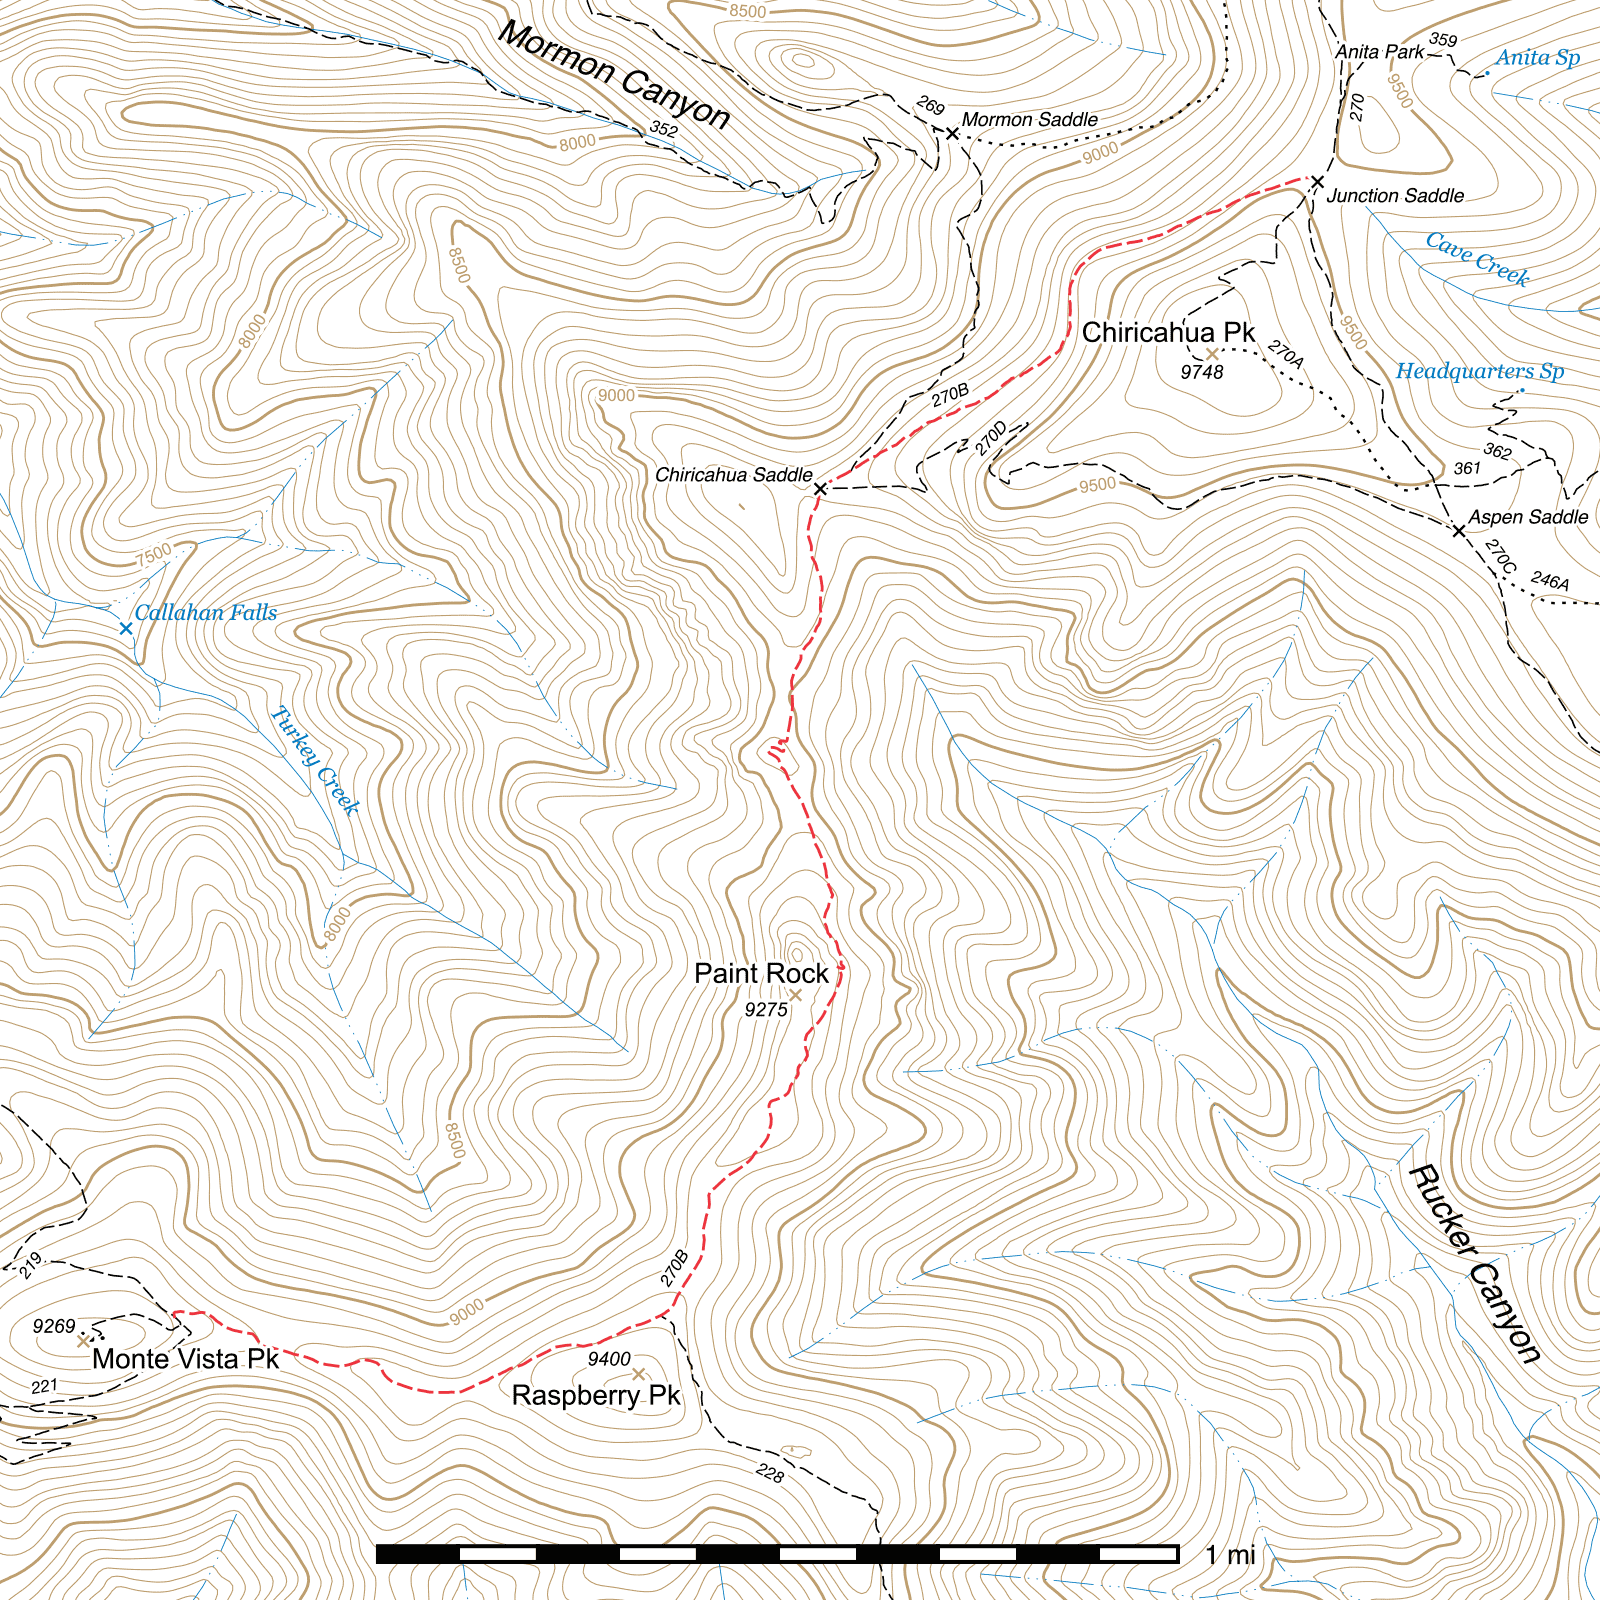 Topographic map of Crest Trail - Junction Saddle to Monte Vista Peak #270B